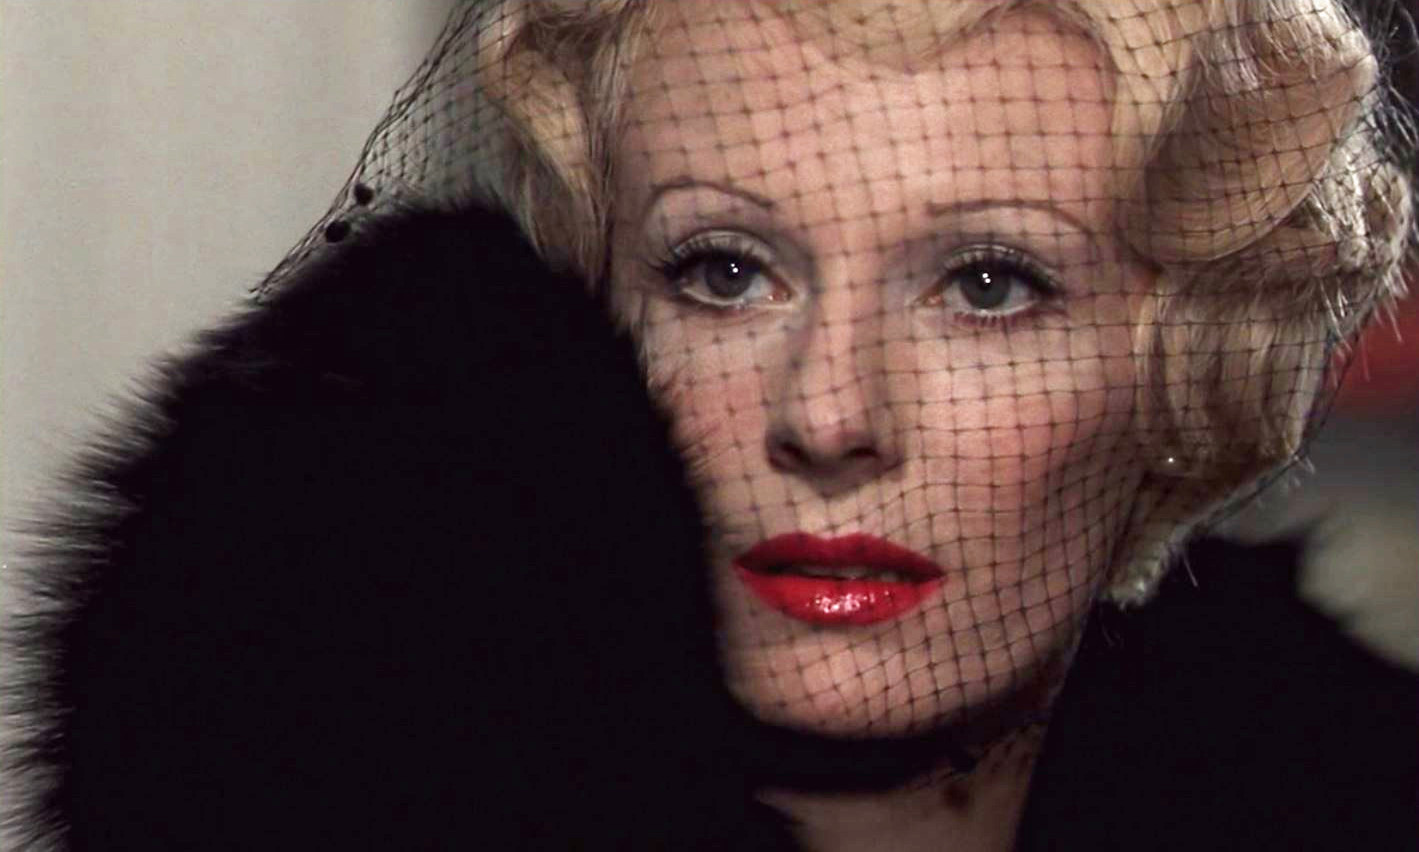  A glamorous blonde Countess Elizabeth Bathory (Delphine Seyrig) peeks out from a veiled fascinator hat and a fur coat in ‘Daughters of Darkness.’